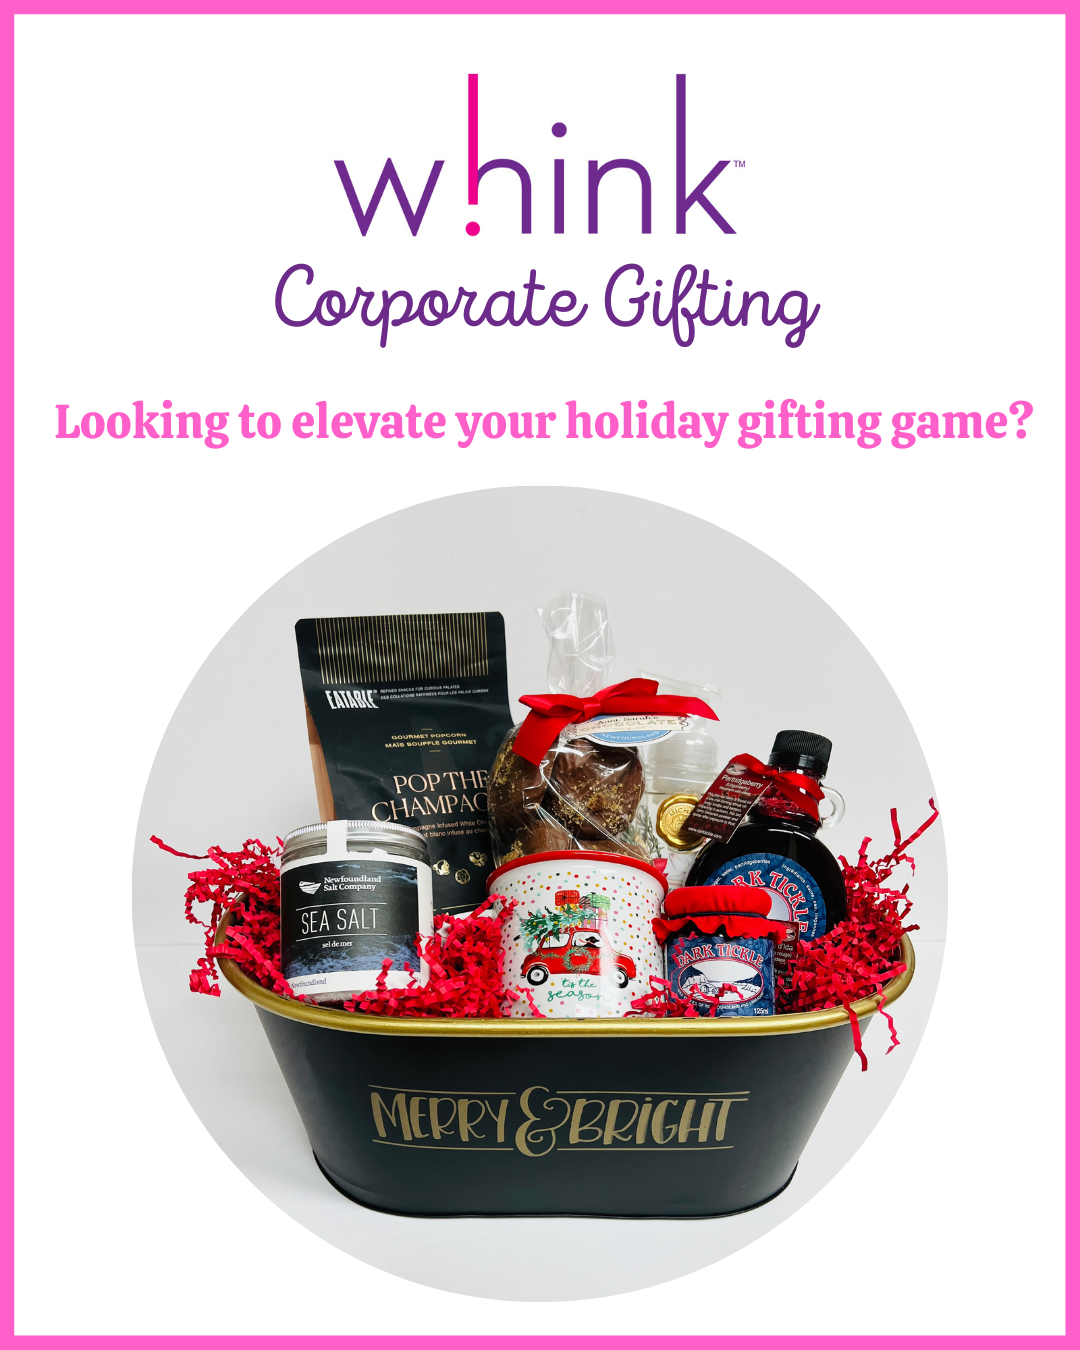 Looking to elevate your company's gifting game?